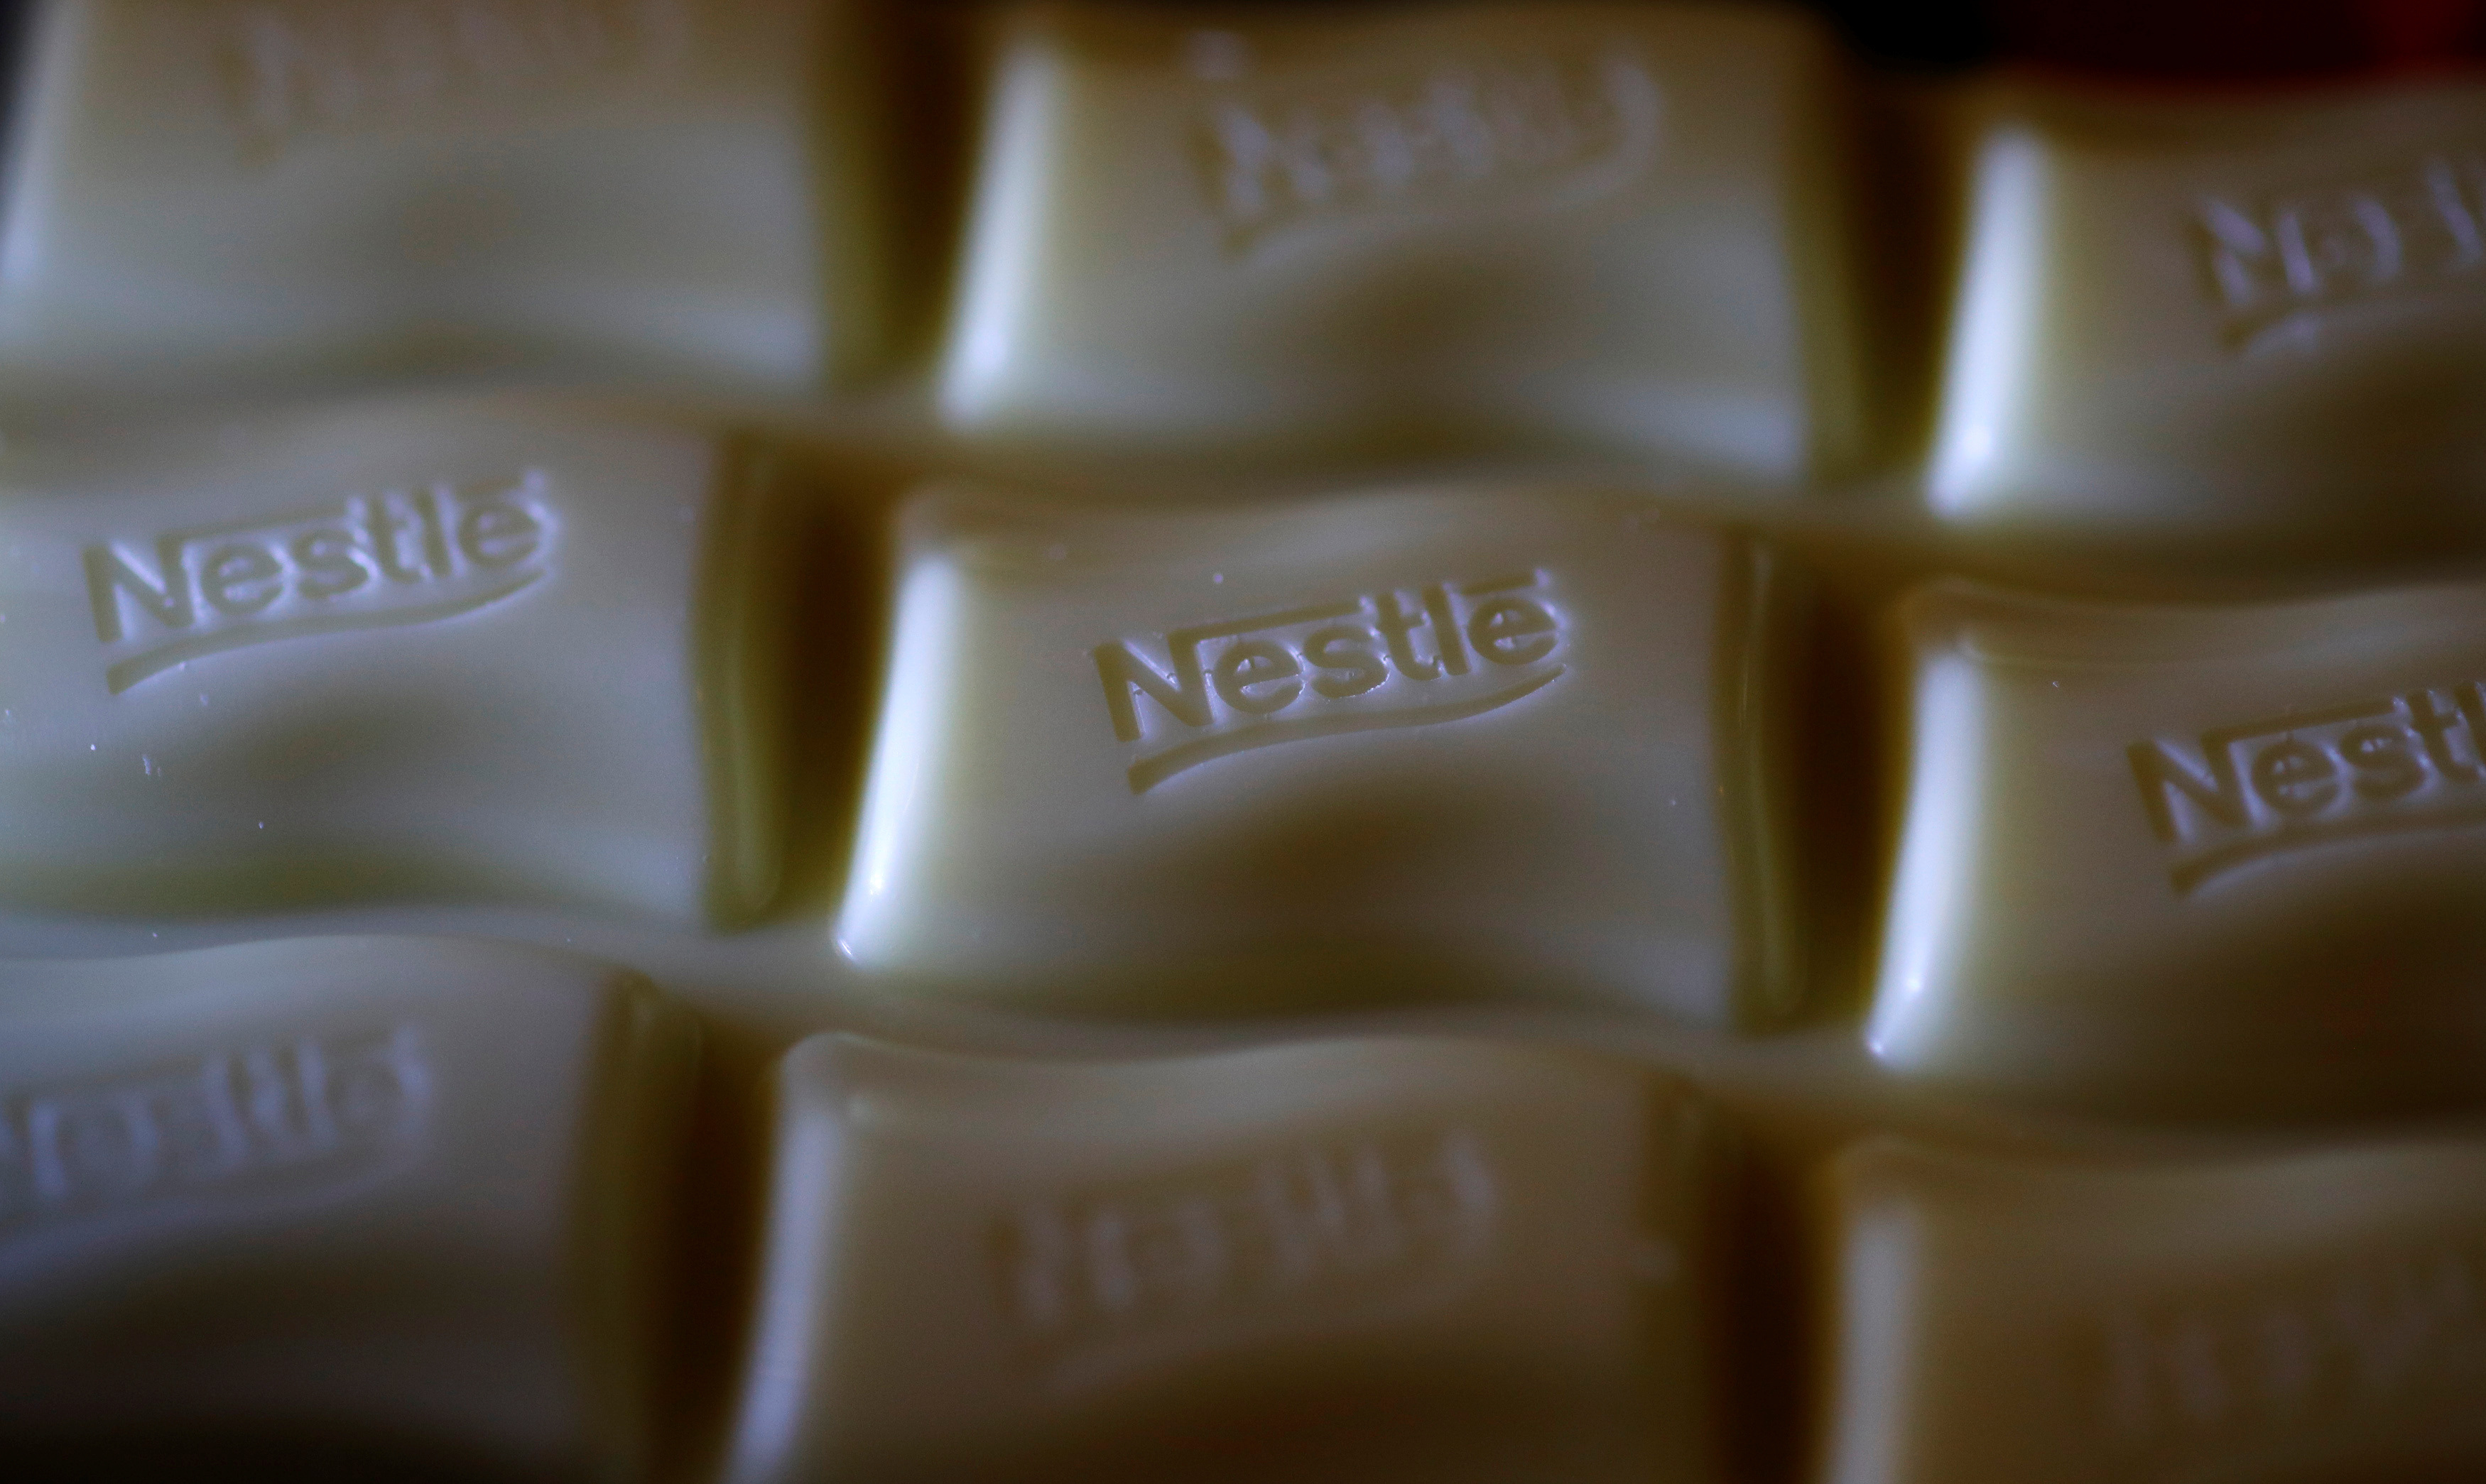 A Nestle company logo is pictured on a bar of Milky Bar chocolate in Manchester, Britain.